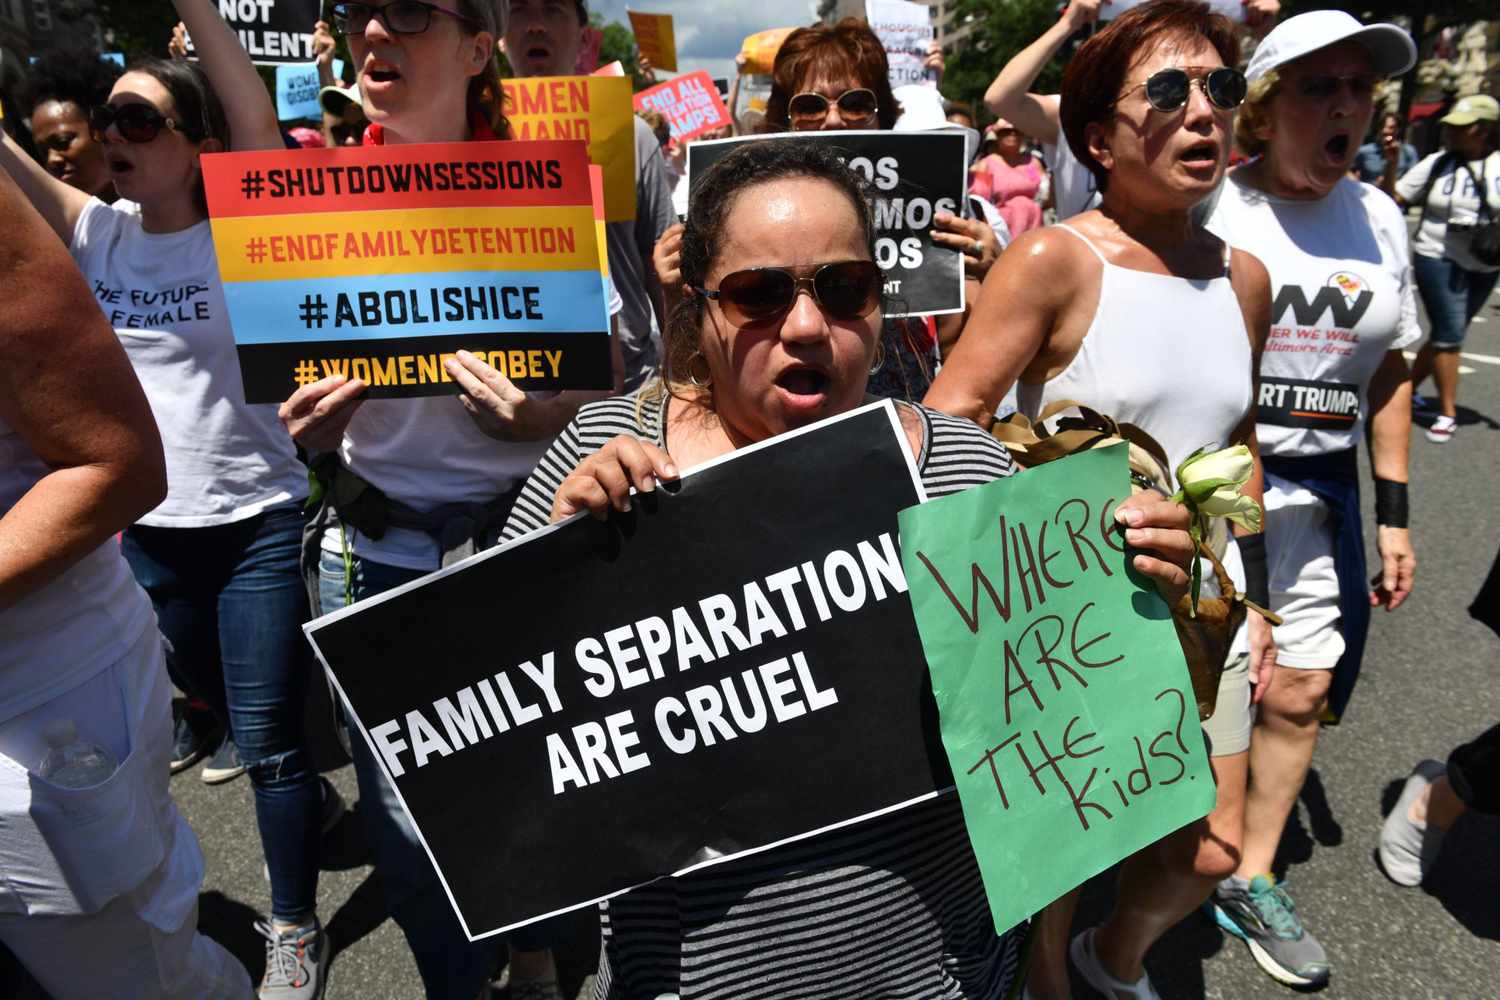 Protestors demanding an end to the separation of migrant children from their parents.